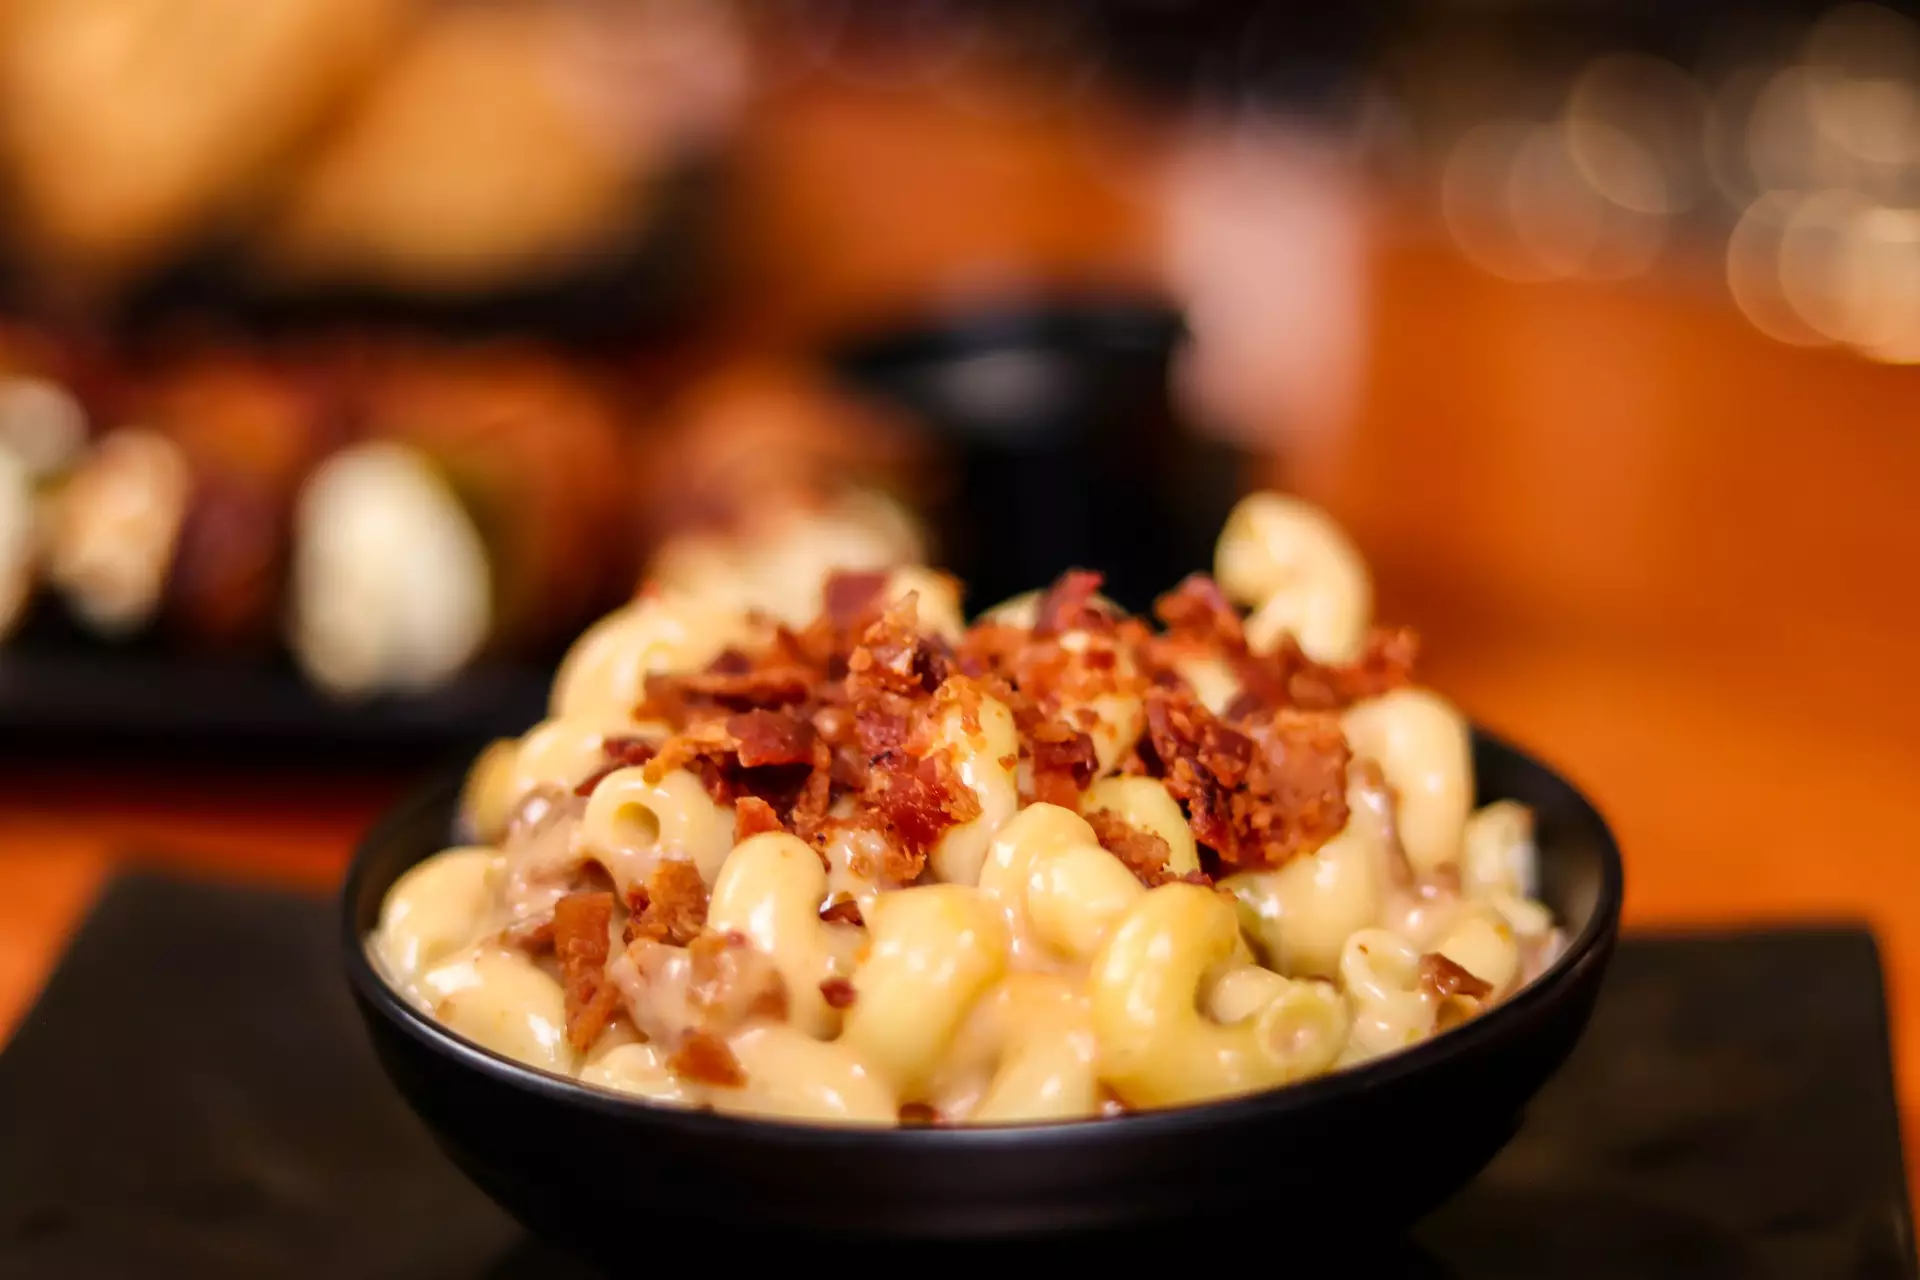 Mac & Cheese is one of life's true delights. (